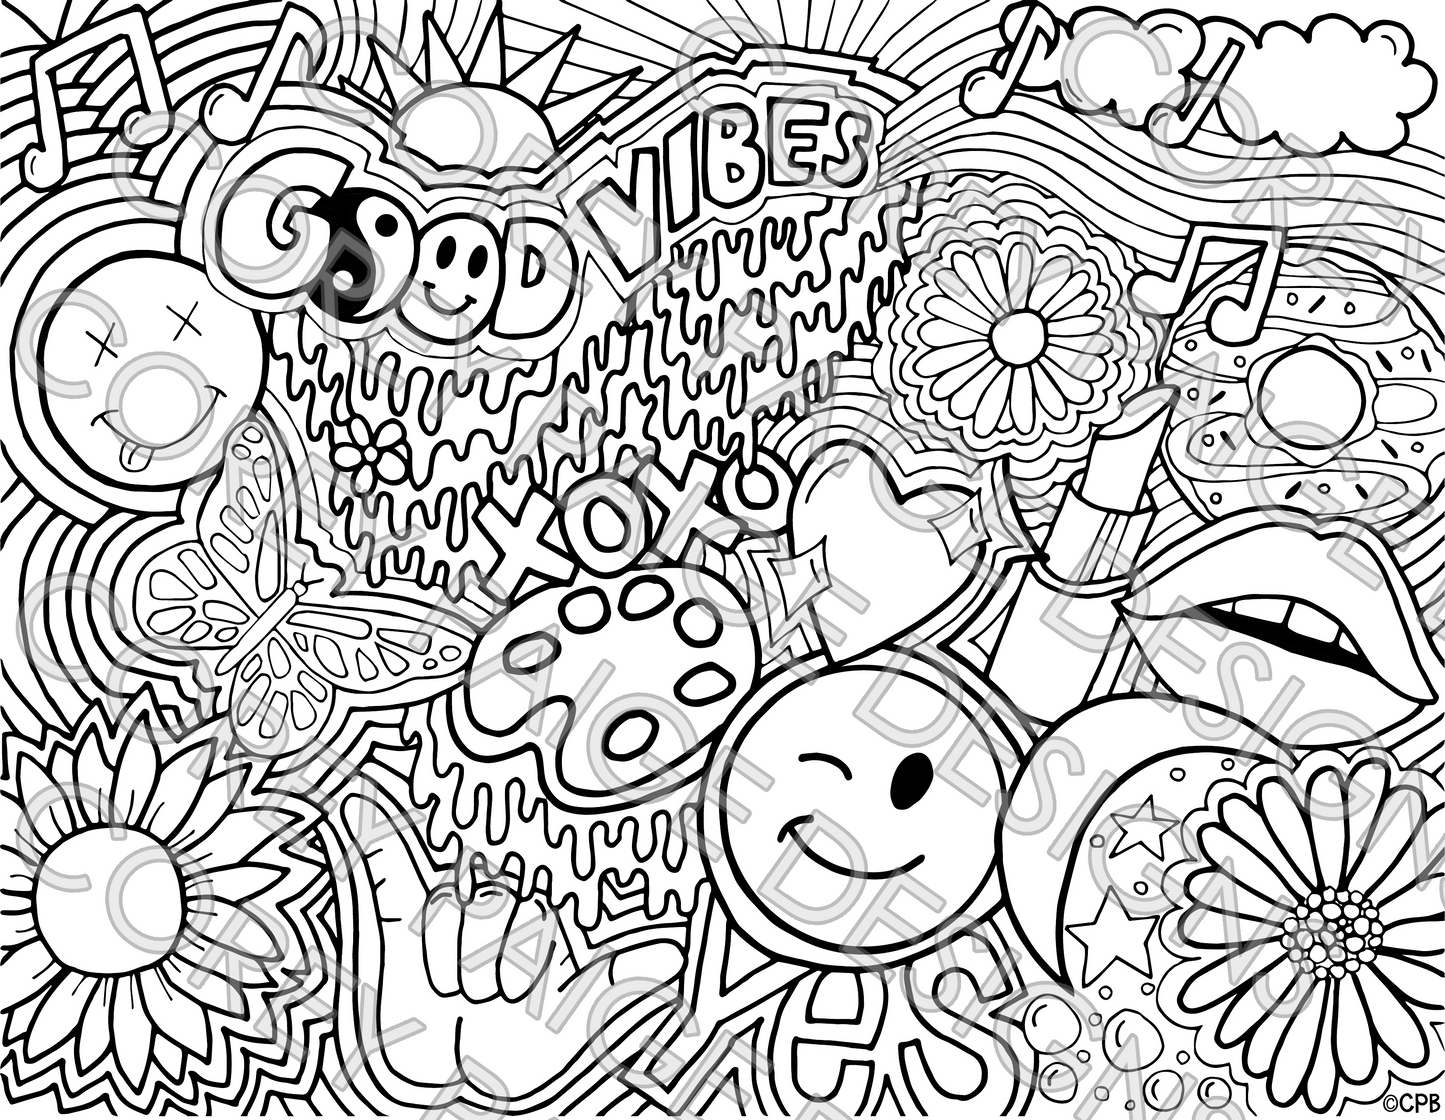 Good Vibes Coloring Sheet Pack